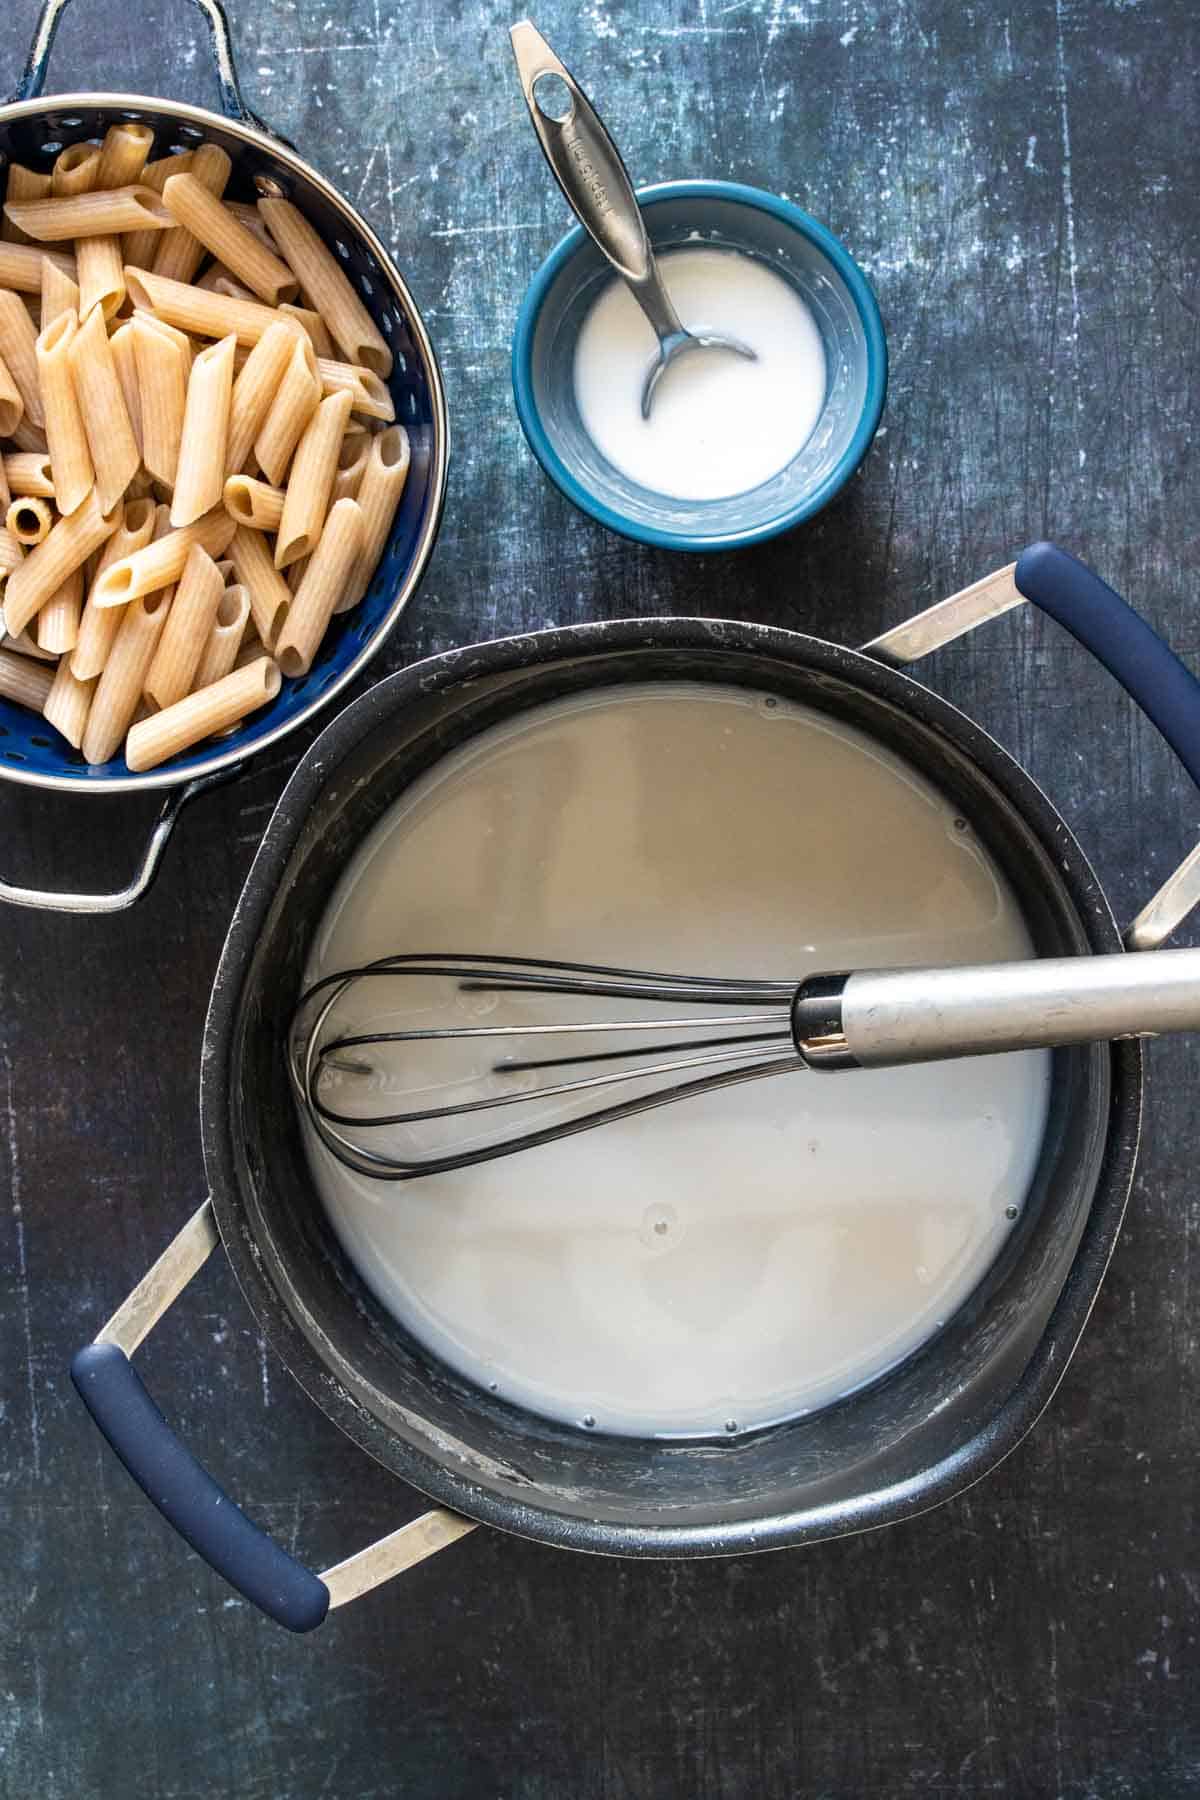 Top view of a large pot with white liquid and a whisk inside next to pasta and another white liquid